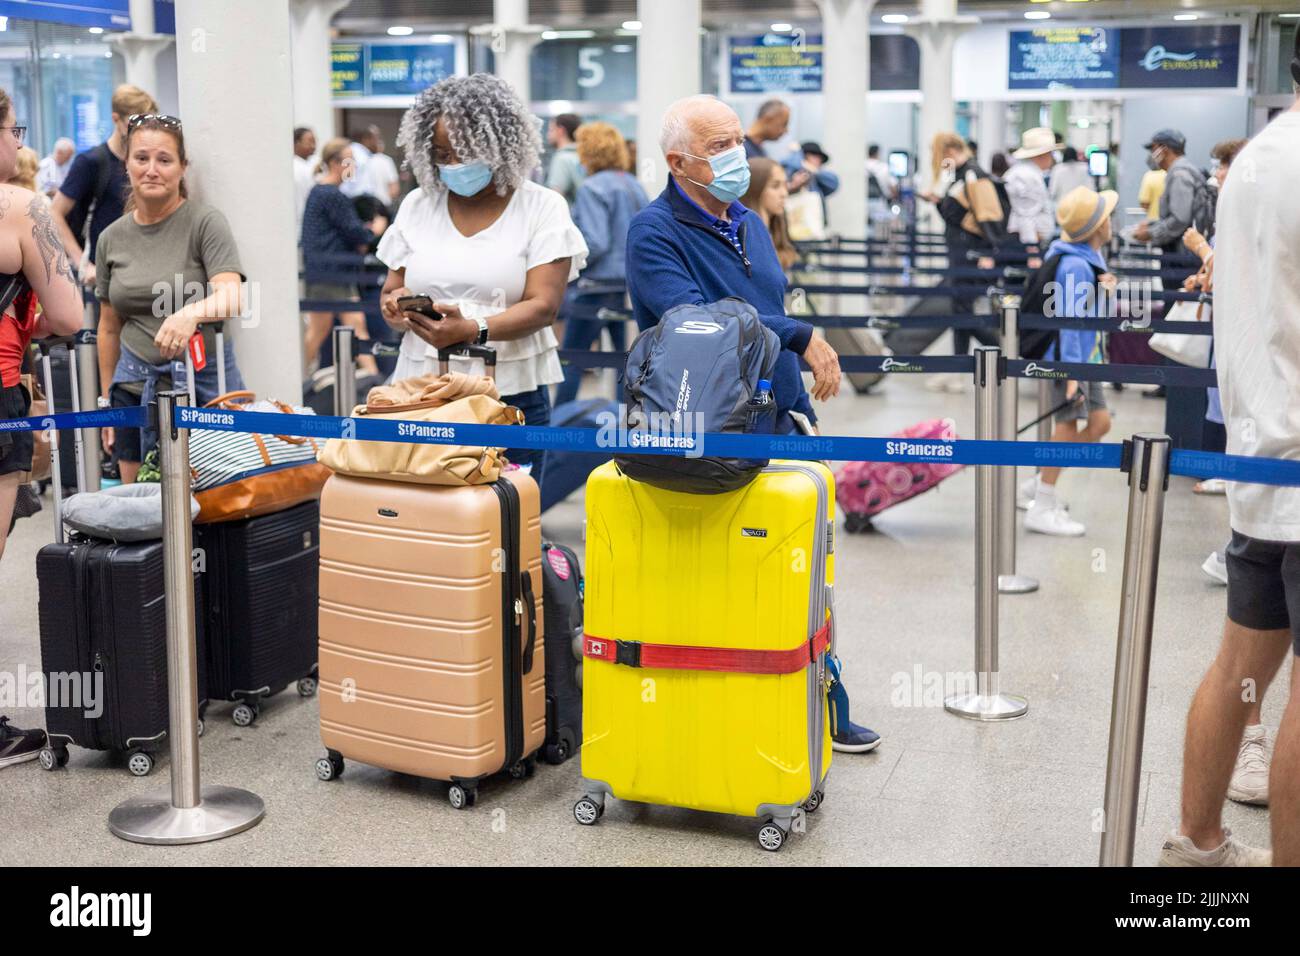 pic shows:  St Pancras Eurostar International Departures today. 25.7.22 Long queues were forming to check in for the trains to France and elsewhere. Stock Photo